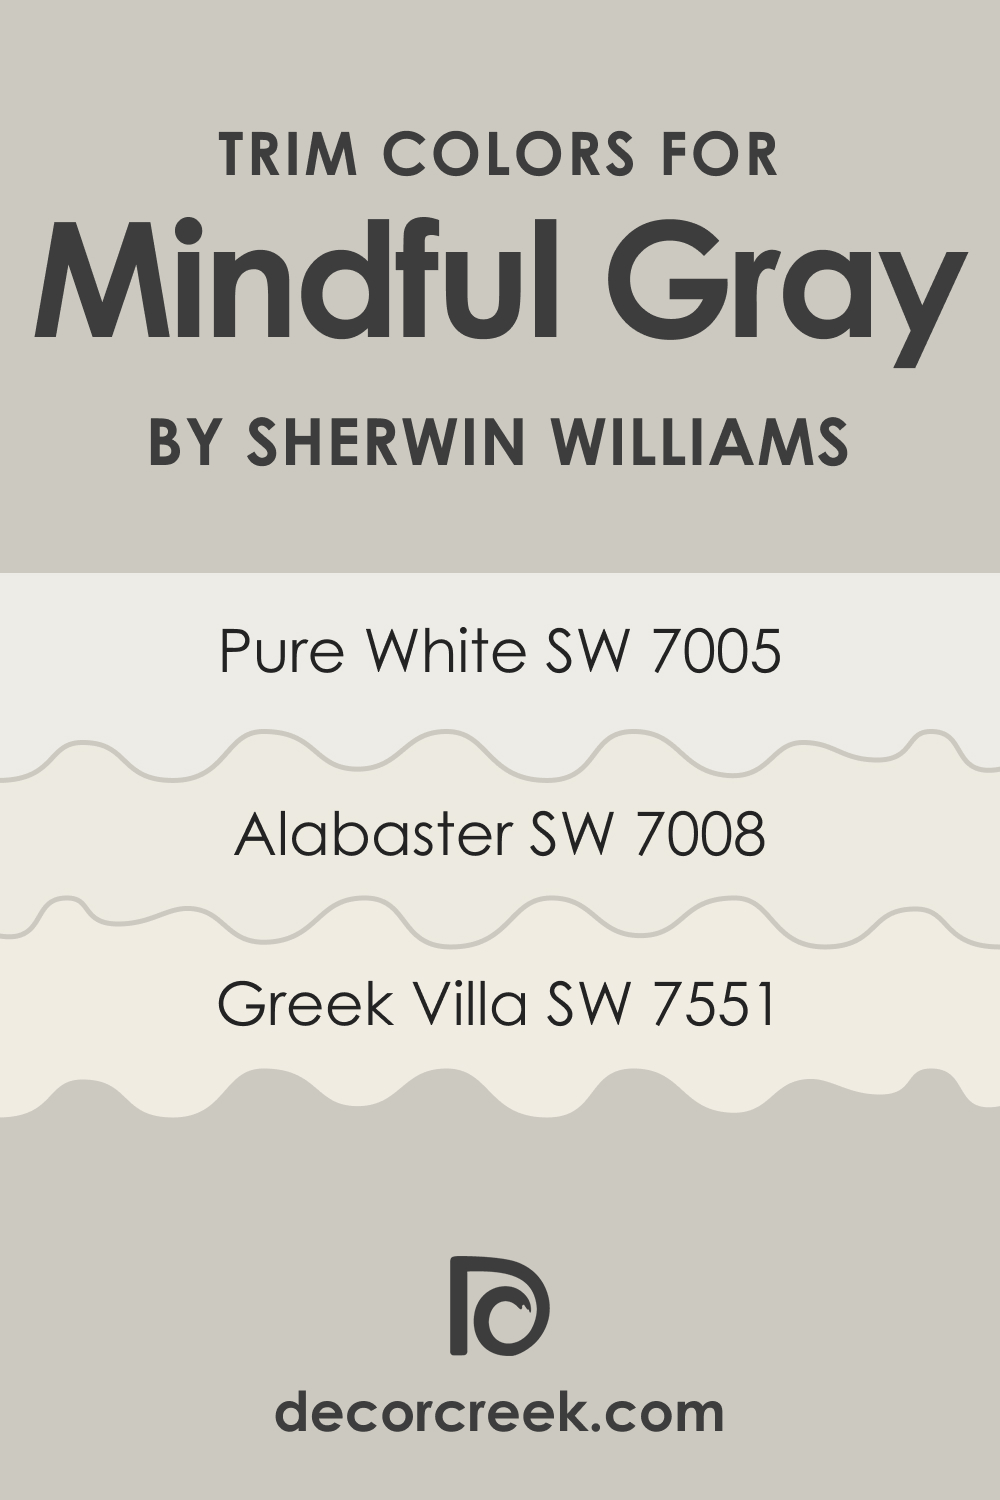 Trim Colors of SW 7016 Mindful Gray